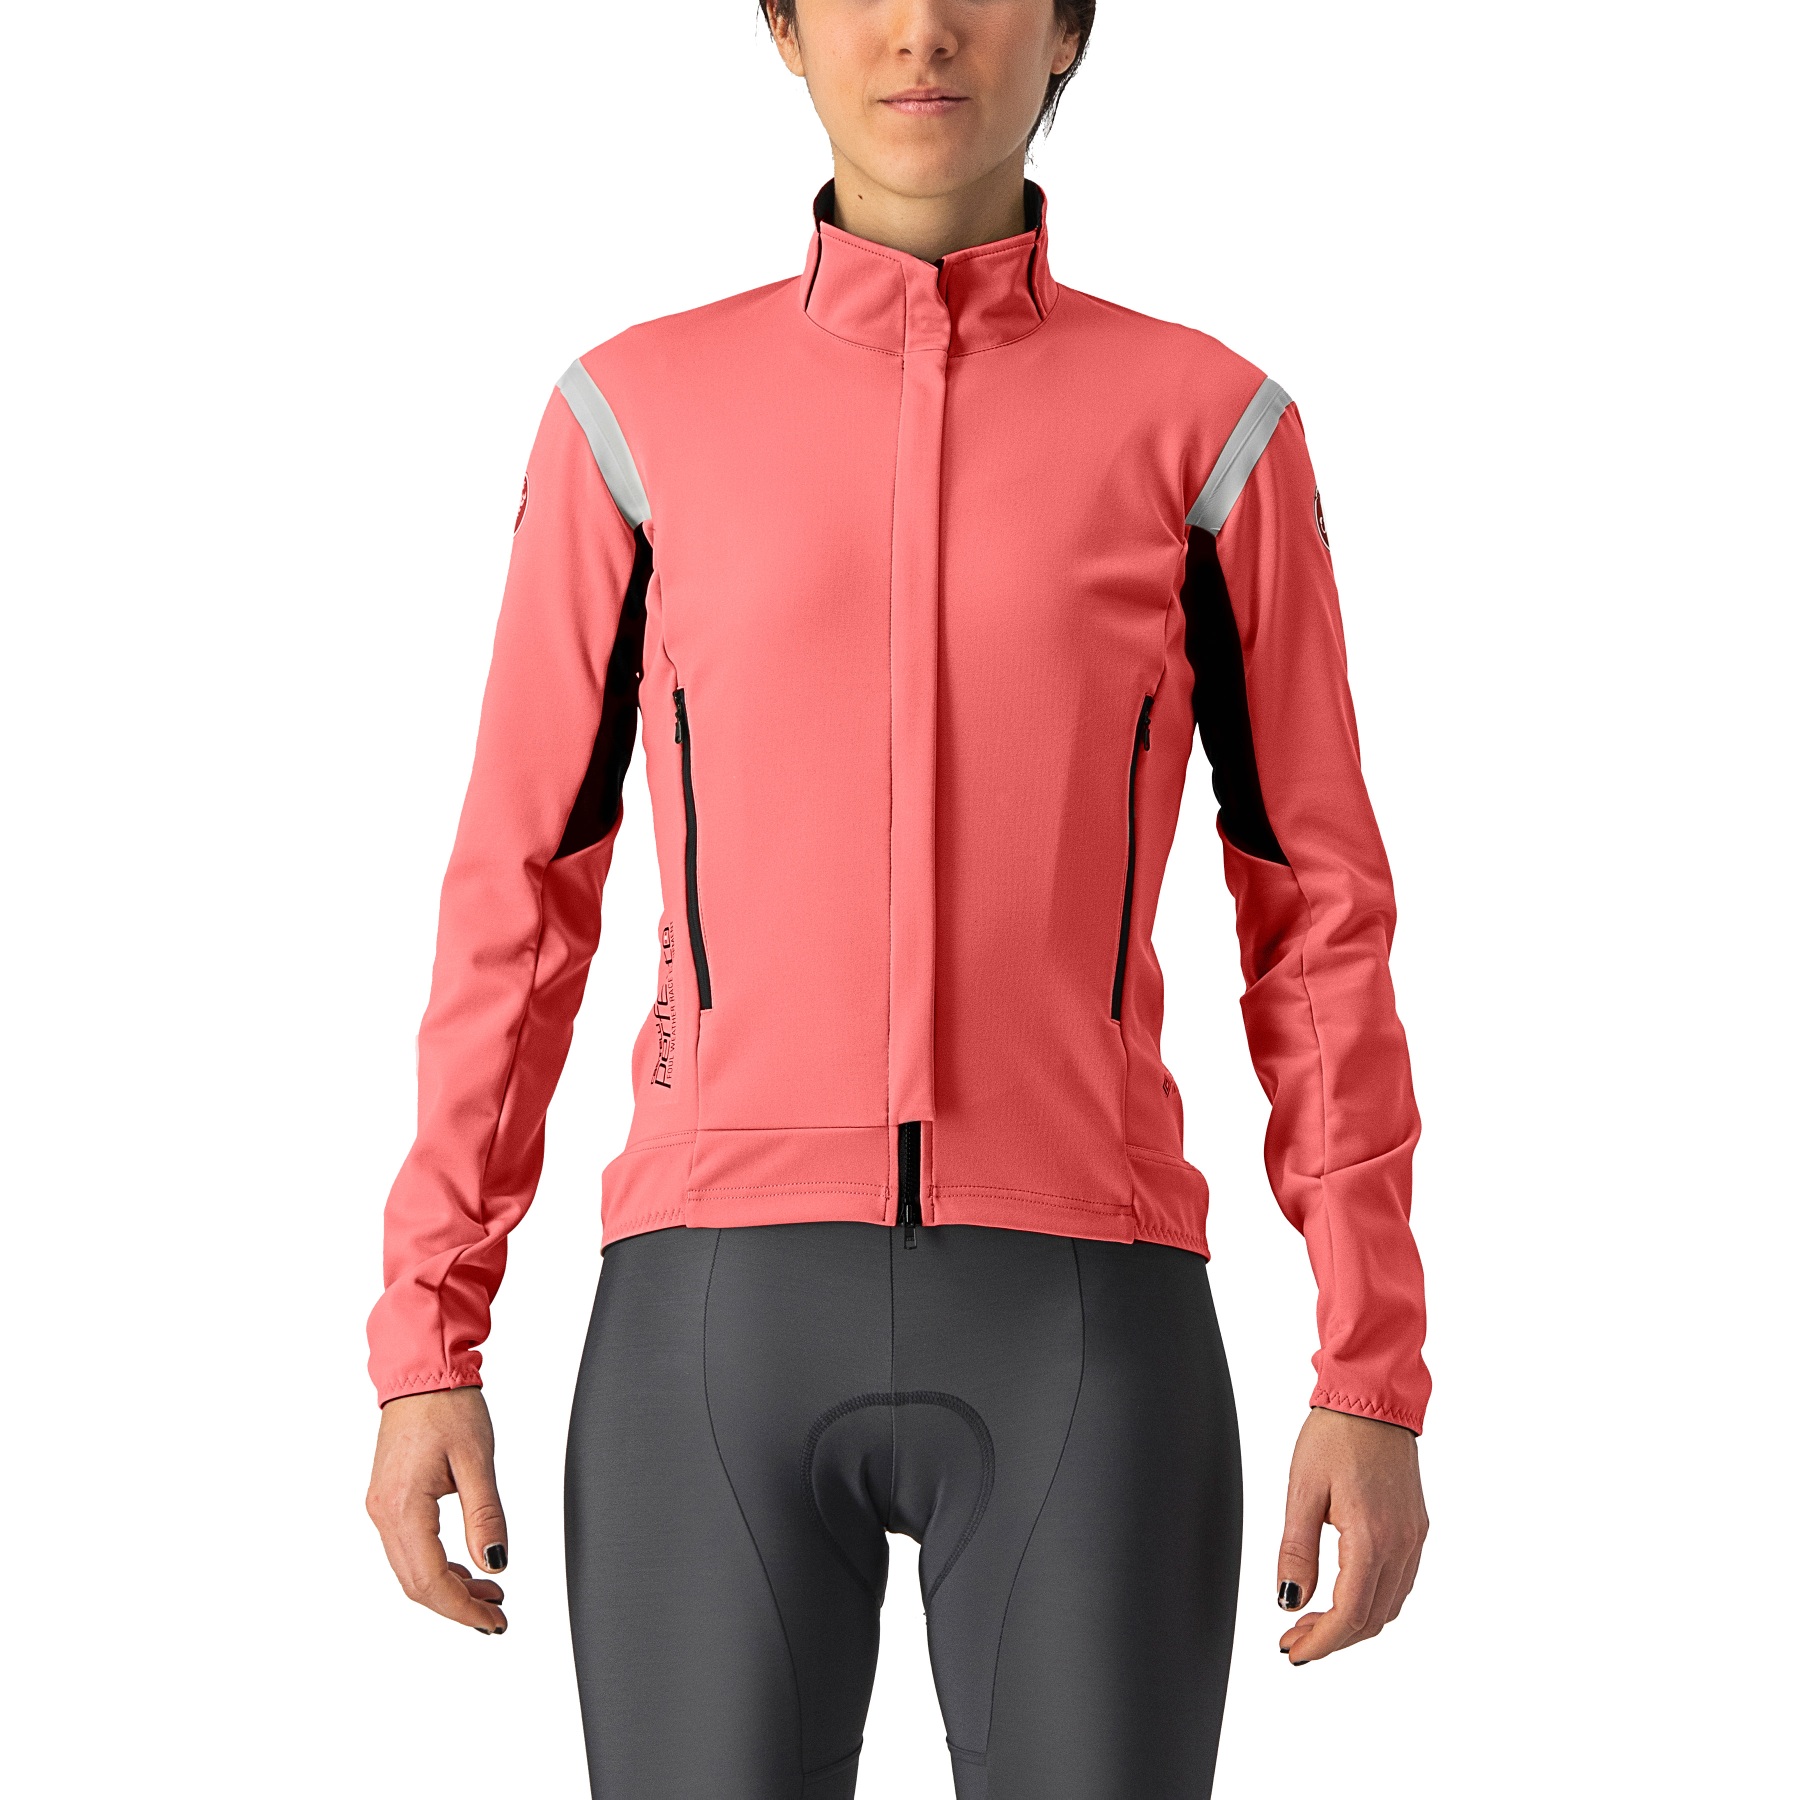 Picture of Castelli Perfetto RoS 2 Jacket Women - mineral red/silver reflex 654